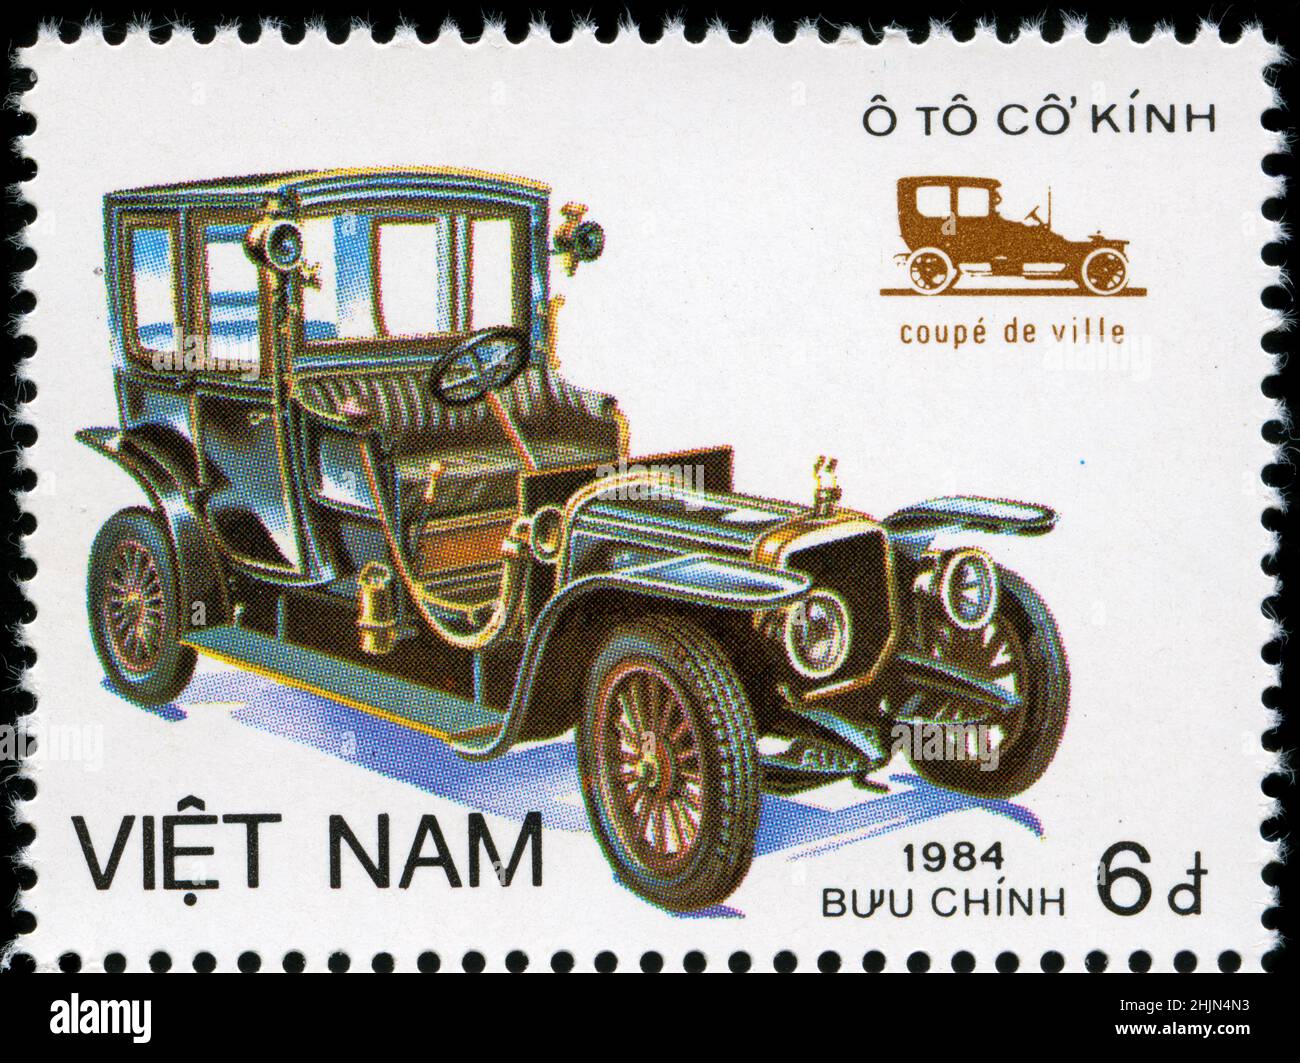 Postage stamp from Vietnam in the  Old Automobiles series issued in 1984 Stock Photo